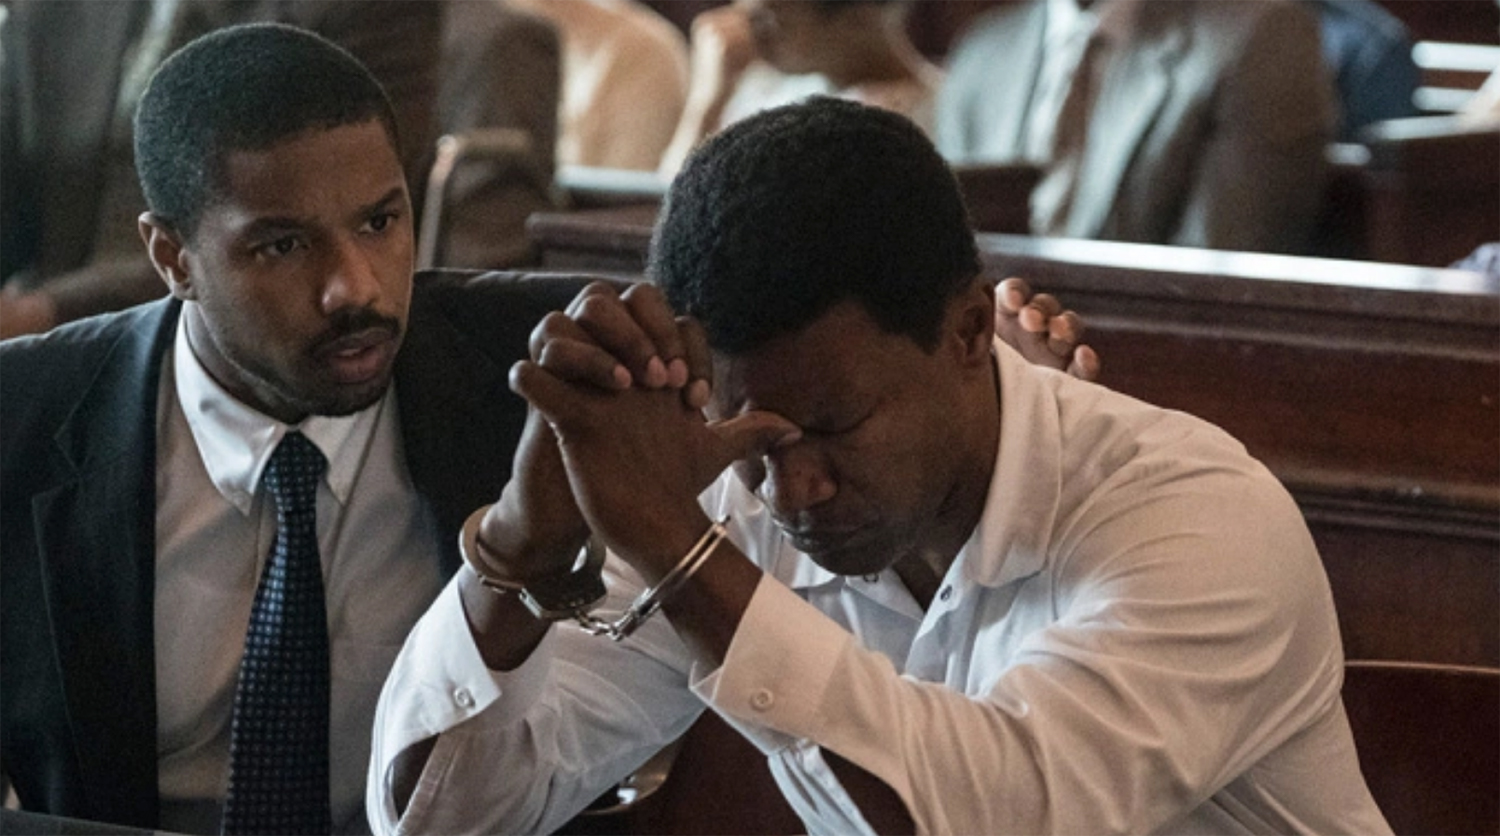 Still frame from the movie Just mercy.  A black attorney comforts his client who is sitting in handcuffs with their head on their hands